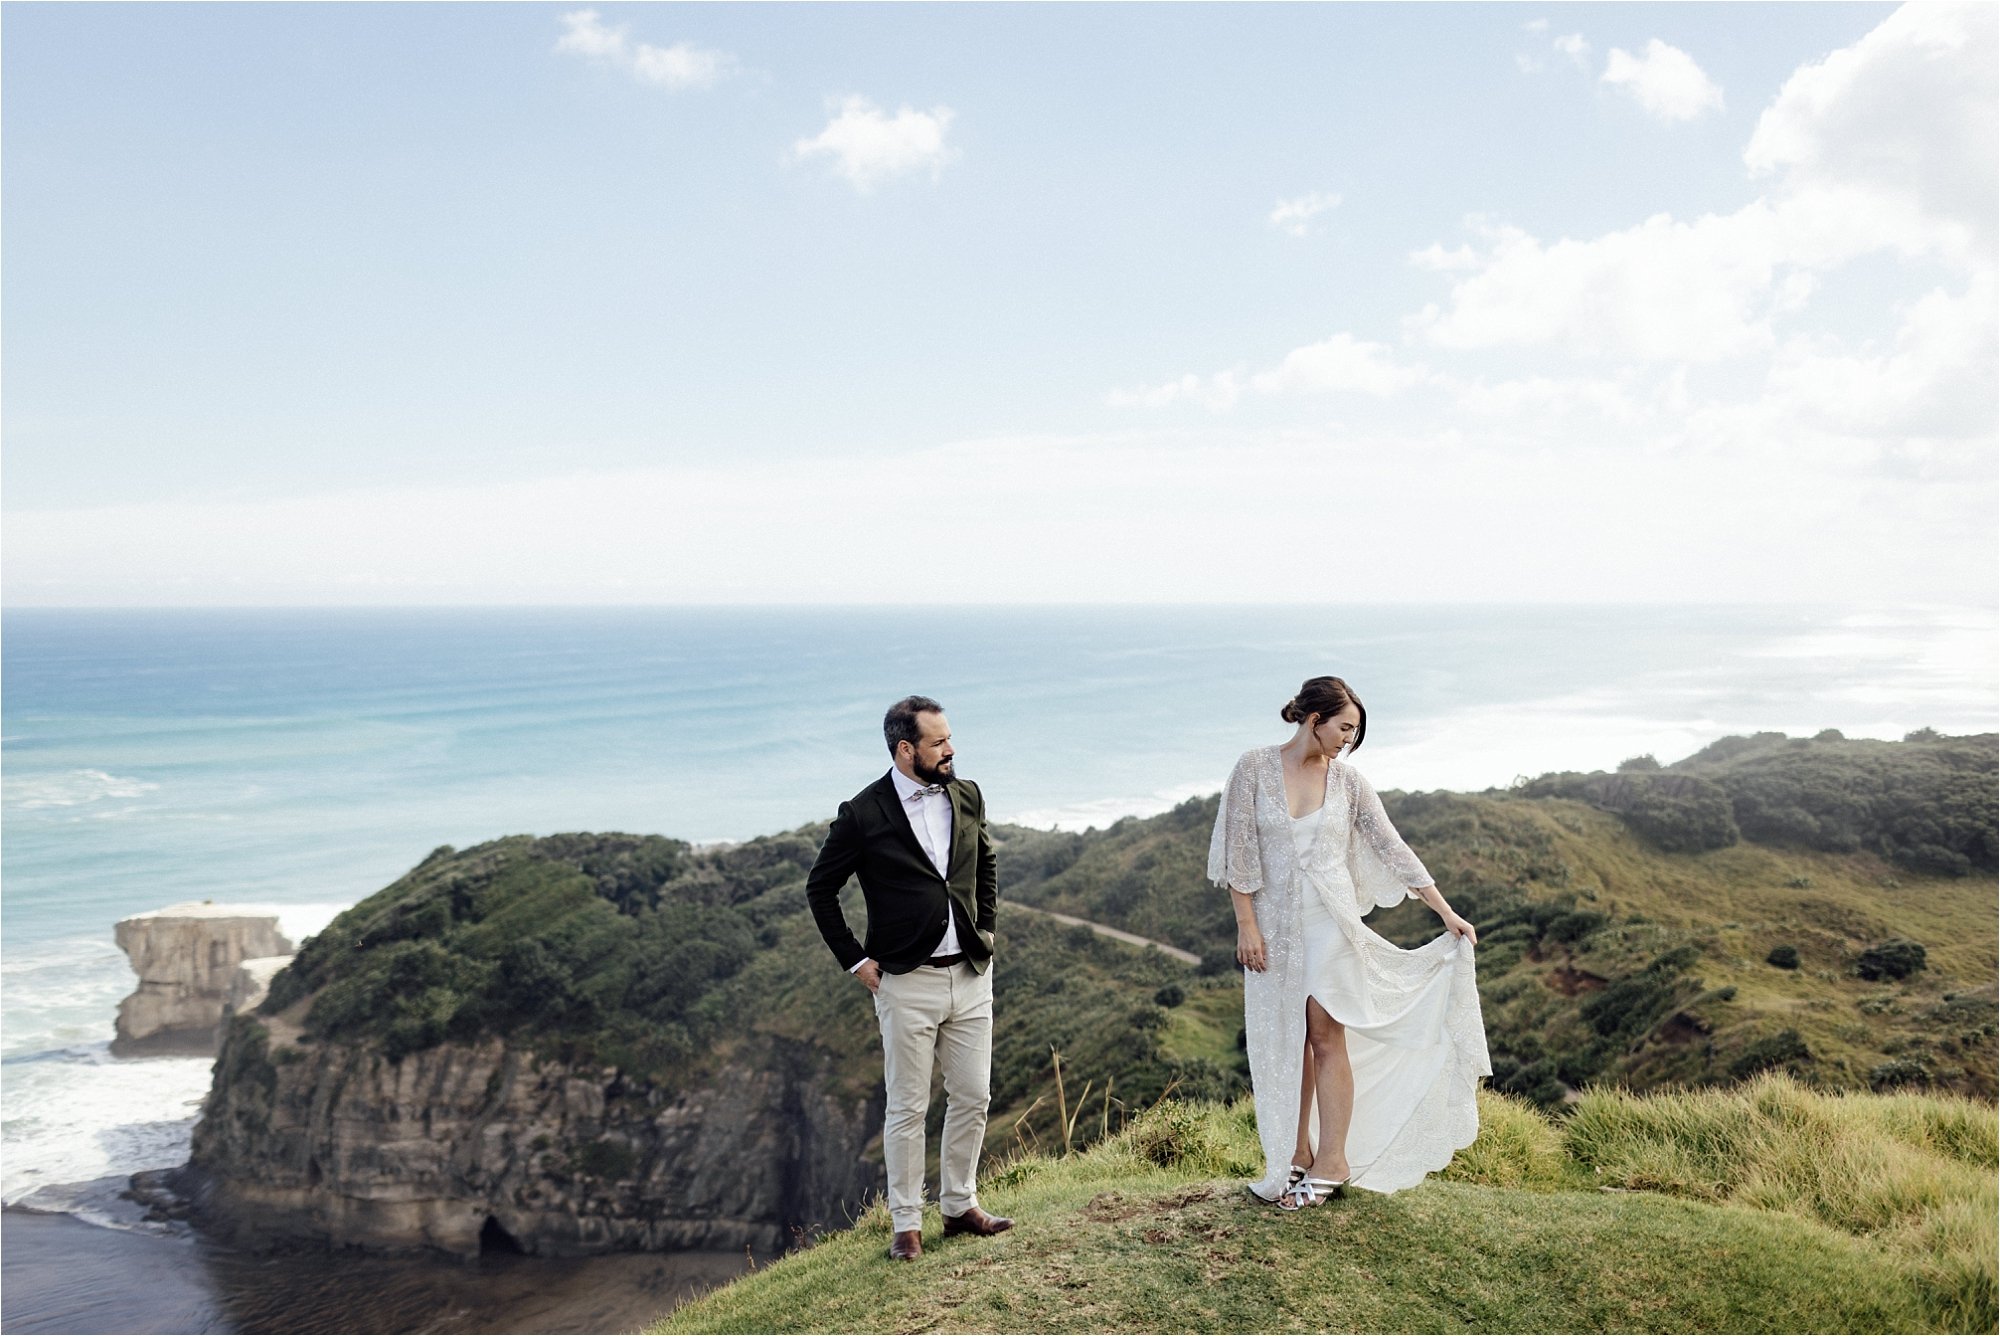 Bride checking her dress on a cliff top at Muriwai Beach